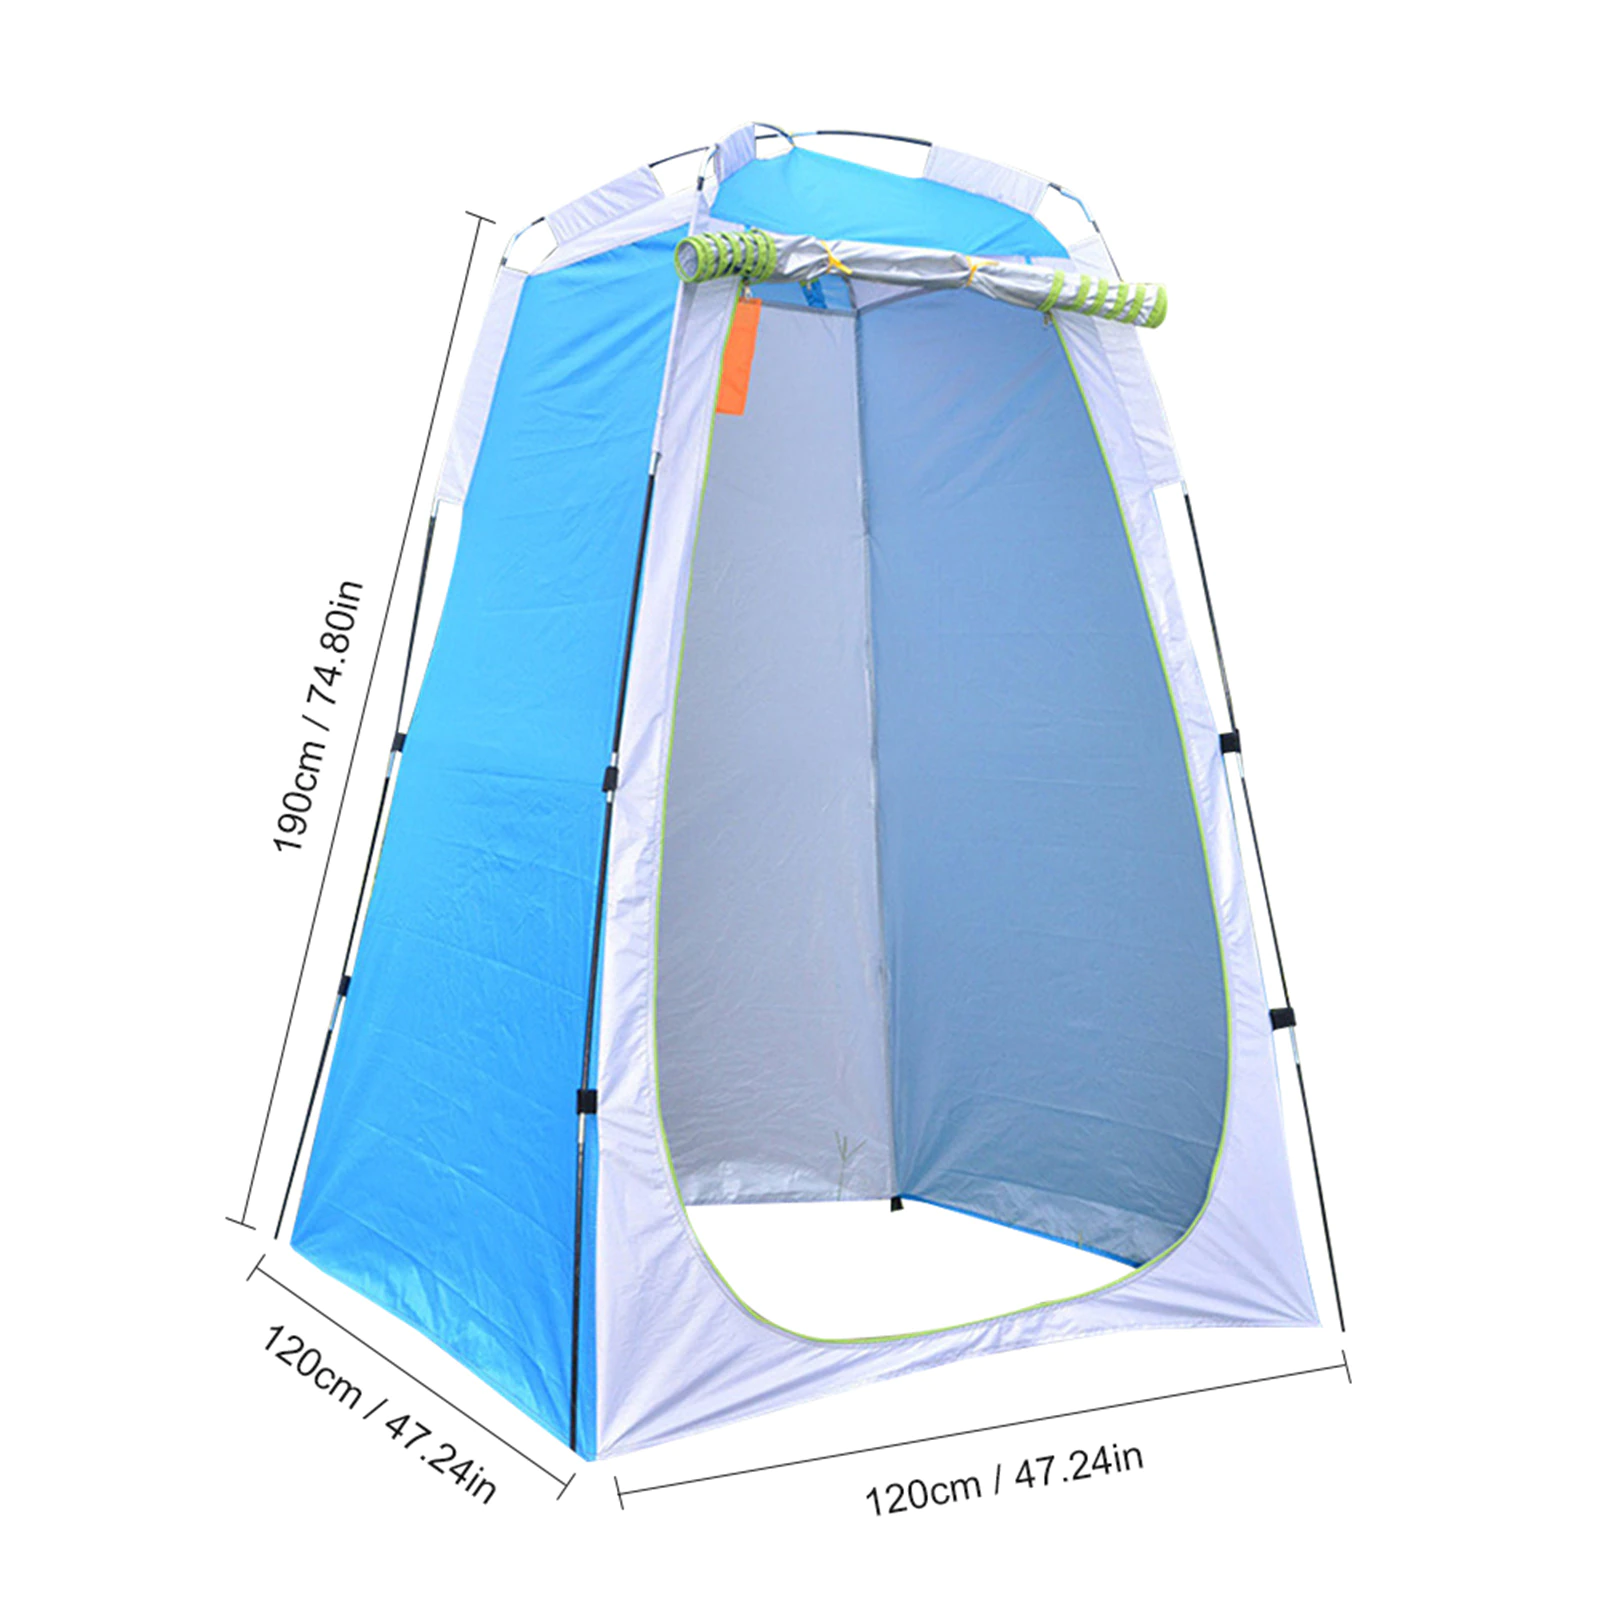 Cheap Goat Tents Outdoor Portable Privacy Shower Toilet Tent Foldable Camping Tent Anti UV Outdoor Dressing Tent Beach Camping Equipment Tents